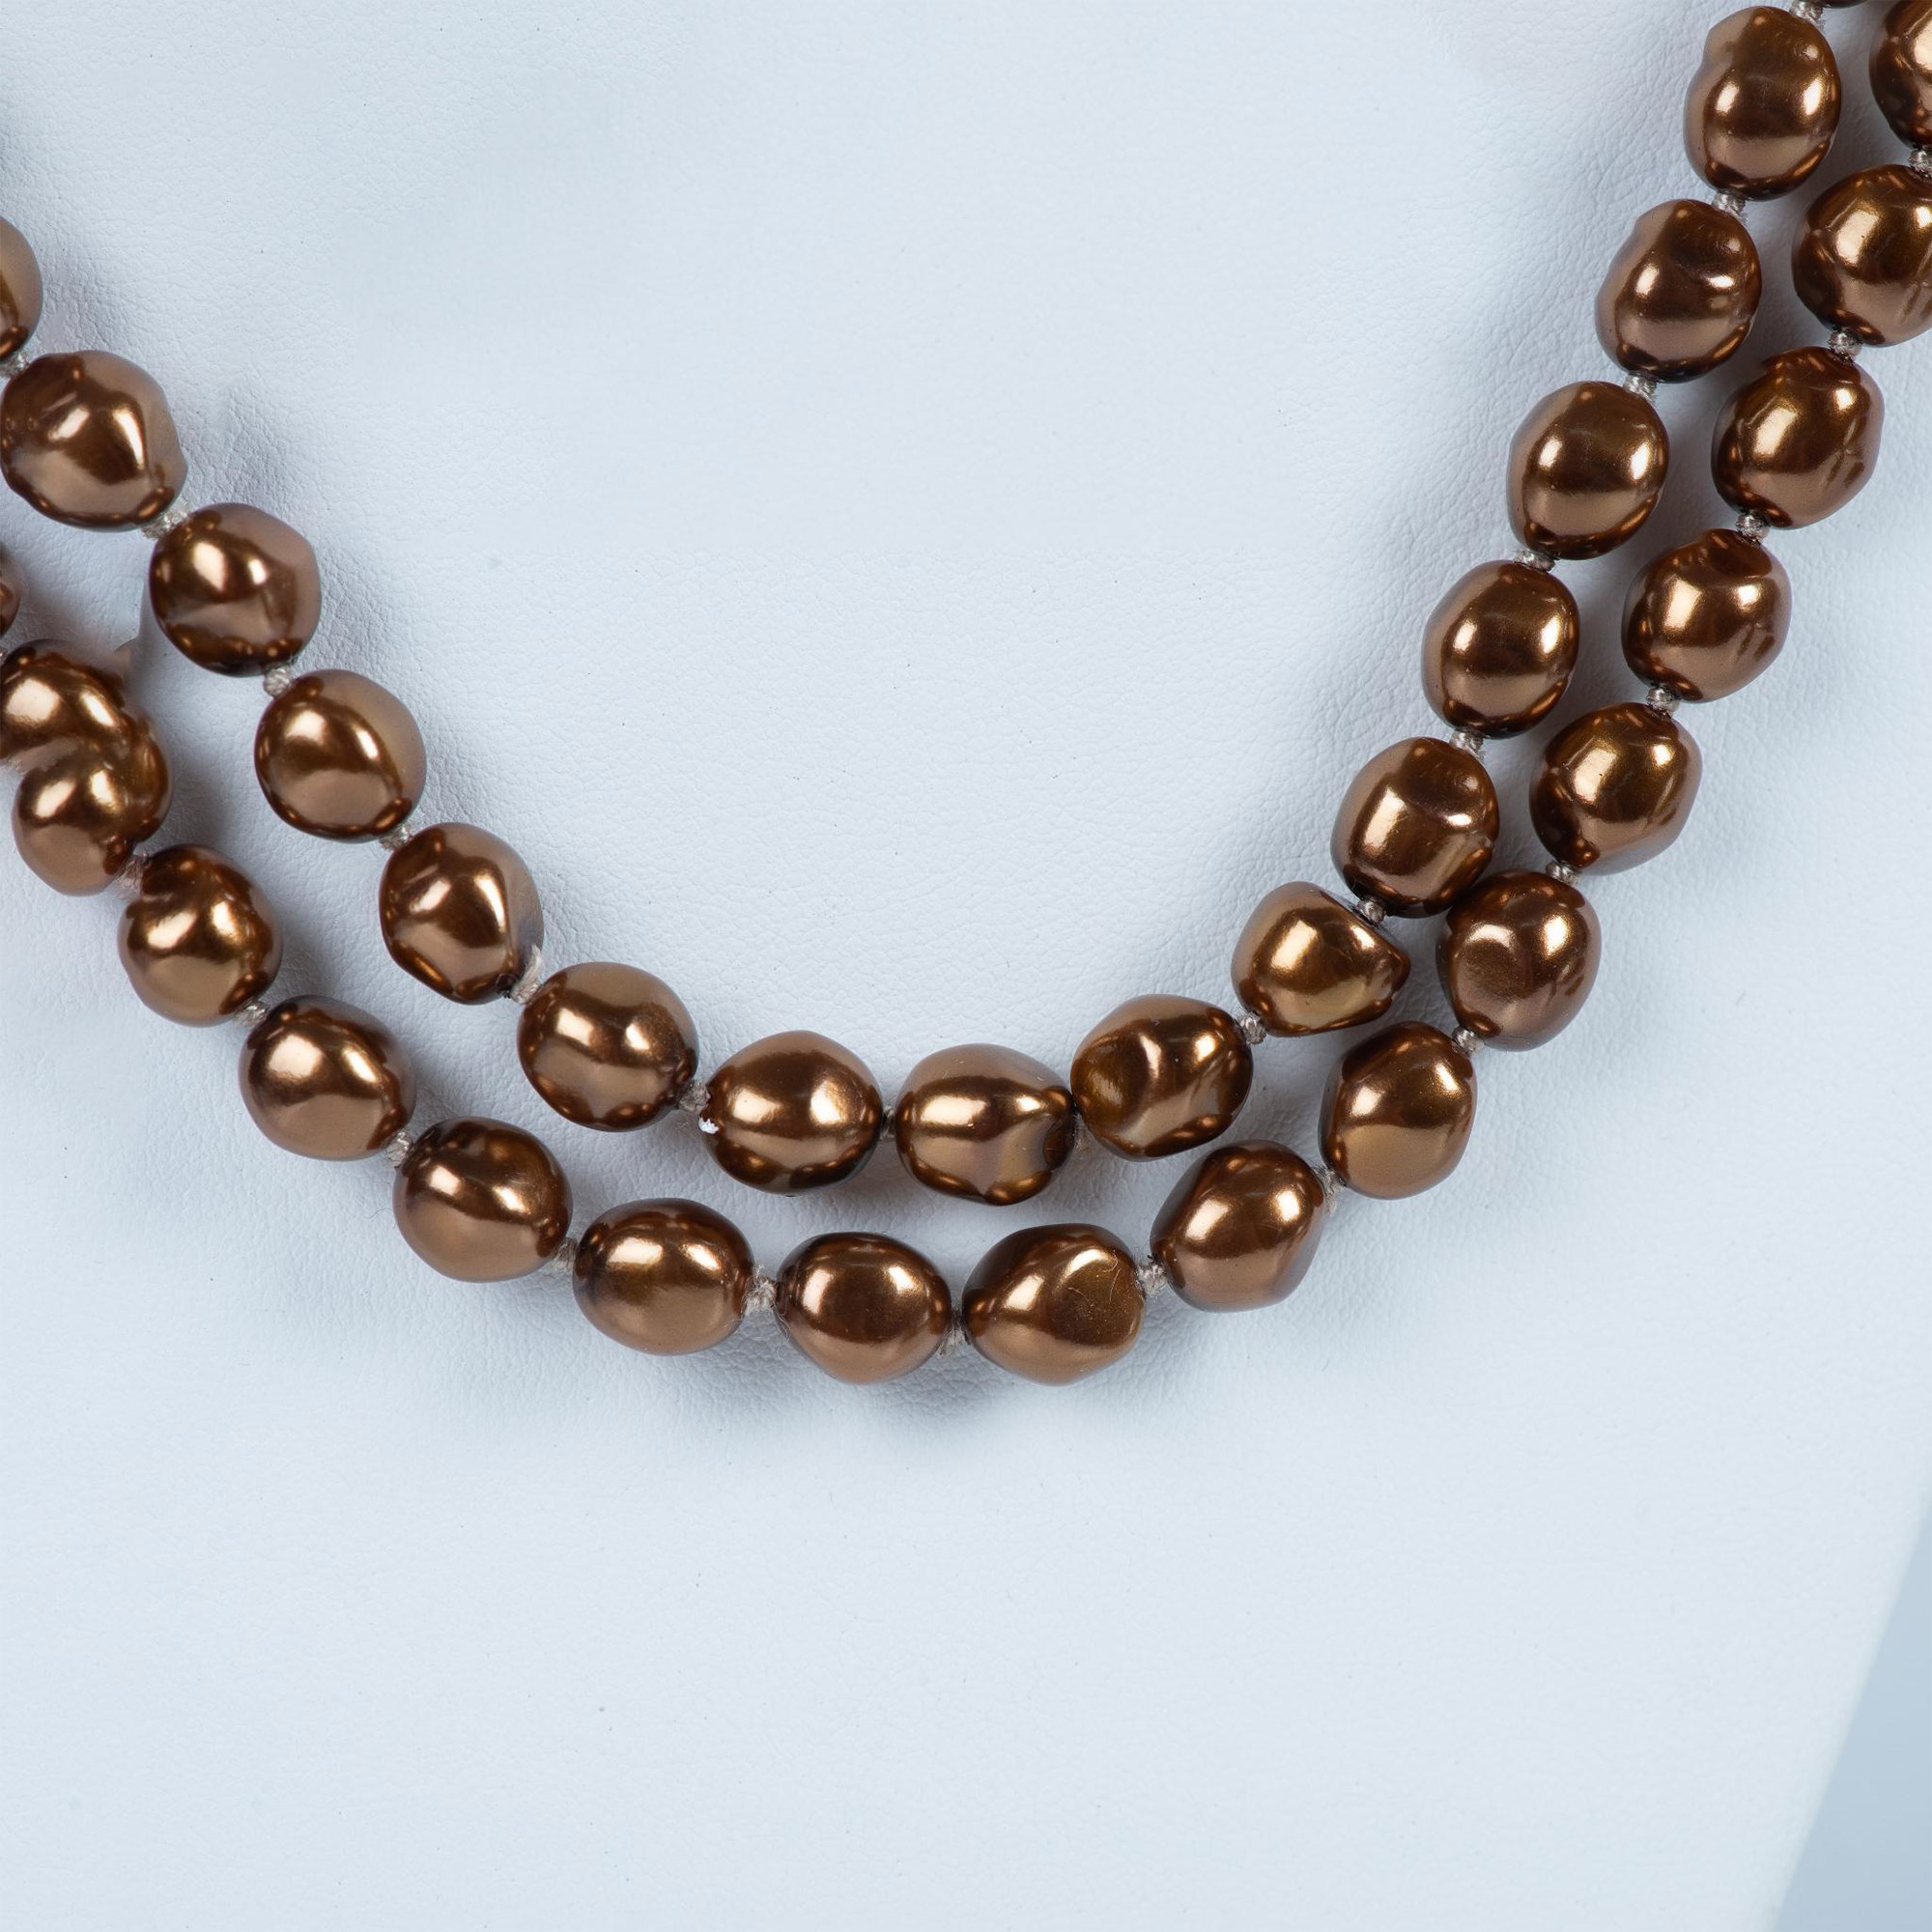 2pc Bronze Faux Baroque Pearl Necklaces - Image 5 of 7